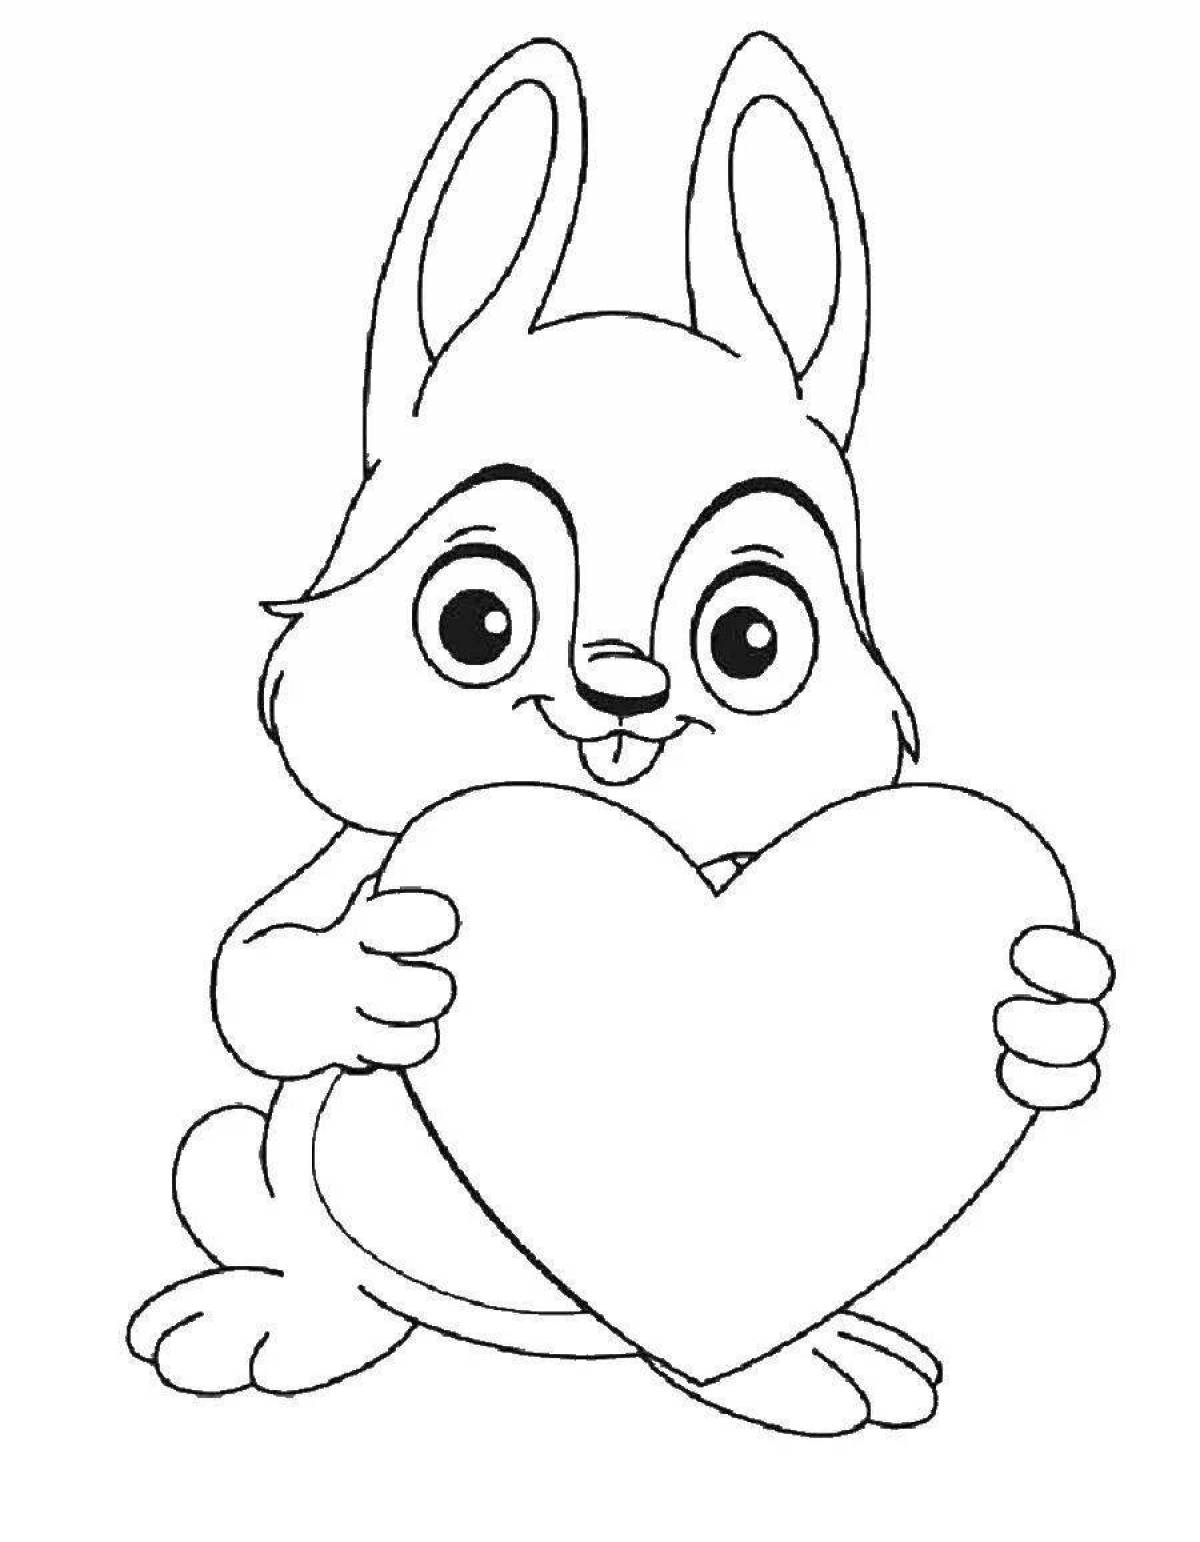 Coloring radiant rabbit with a heart